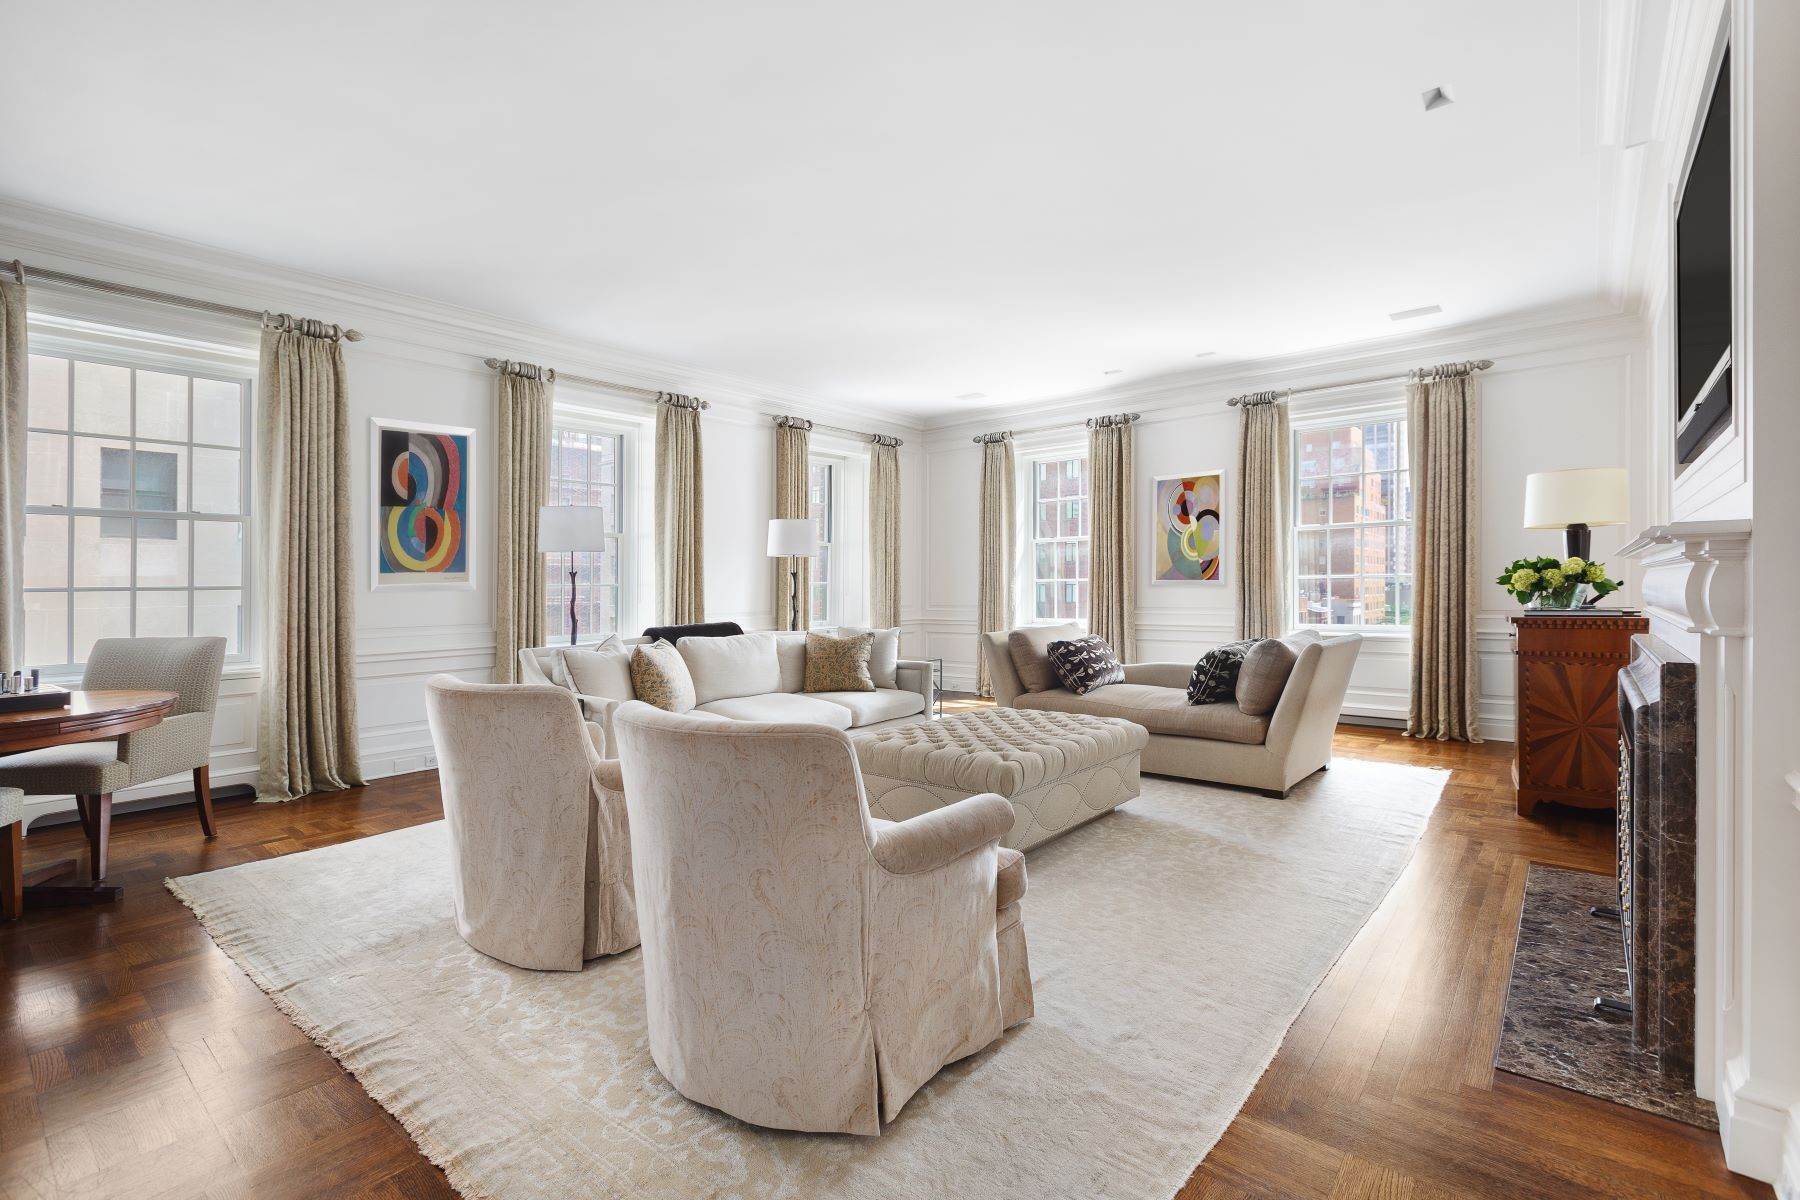 Co-op Properties for Sale at 730 Park Avenue, Apt 7/8B New York, New York 10021 United States